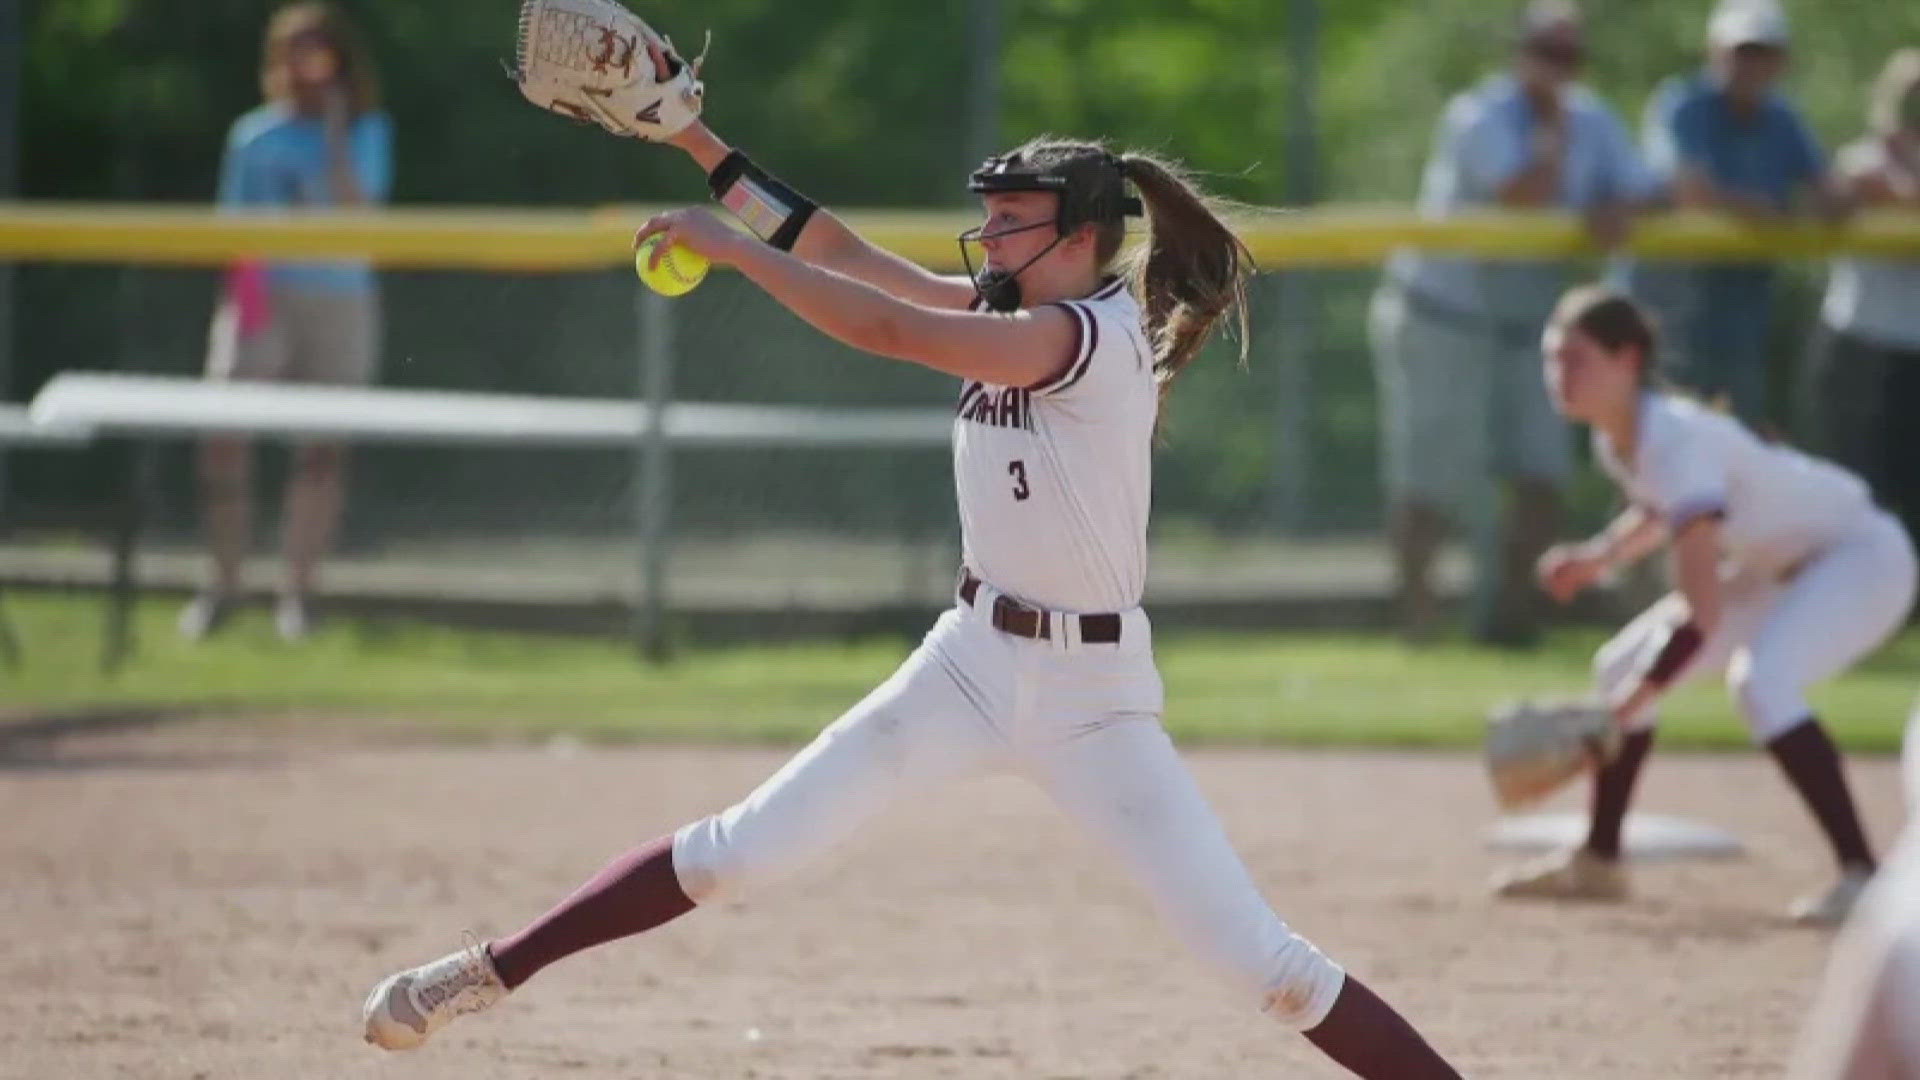 The softball star racked up multiple individual awards and won a state title during her career. She'll play at the University of Rhode Island next year.